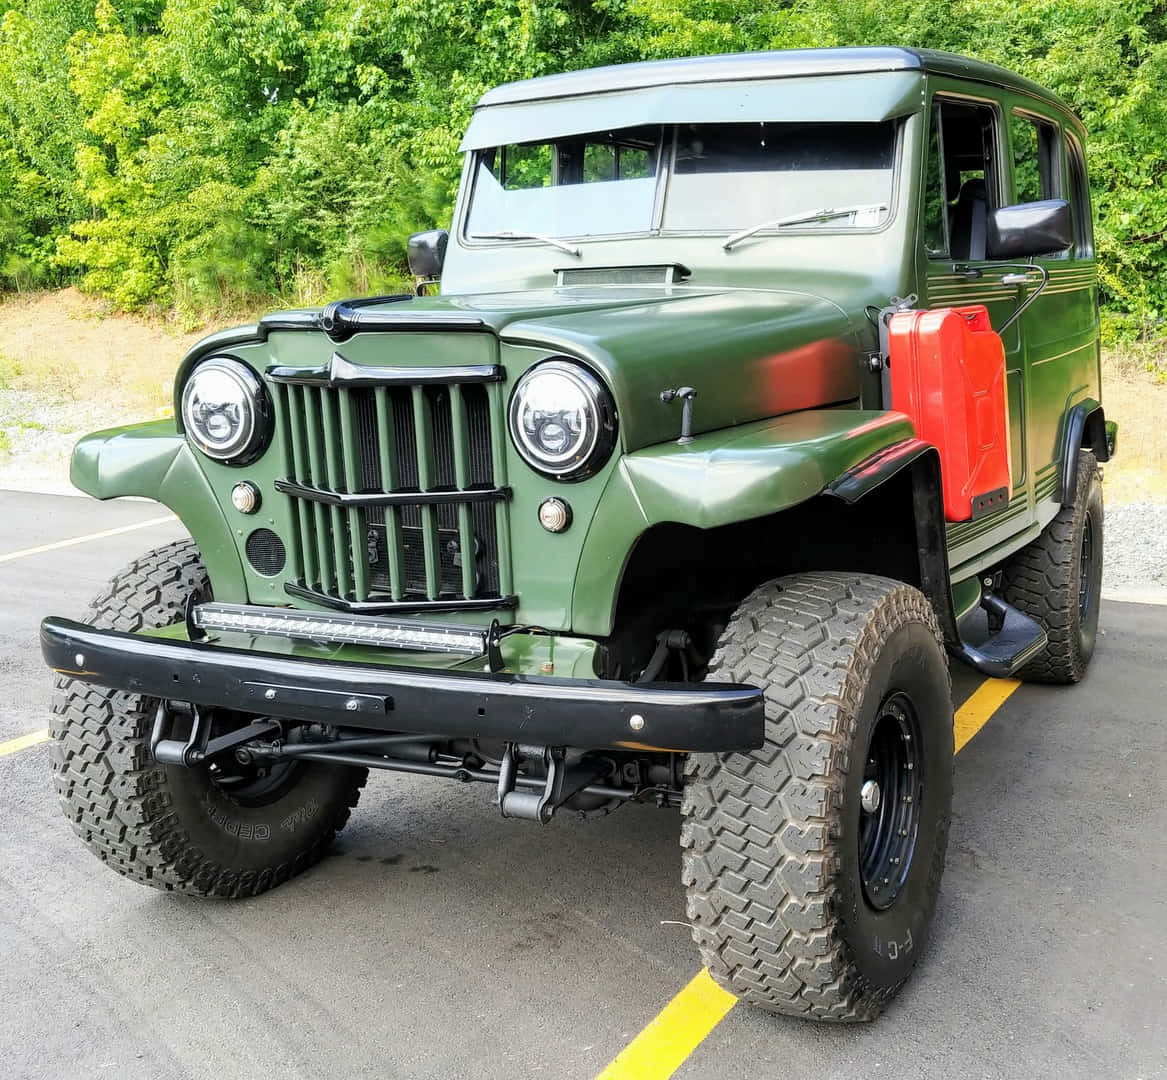 Caption: Vintage Jeep Willys 4x4 Off-Road Adventure Wallpaper